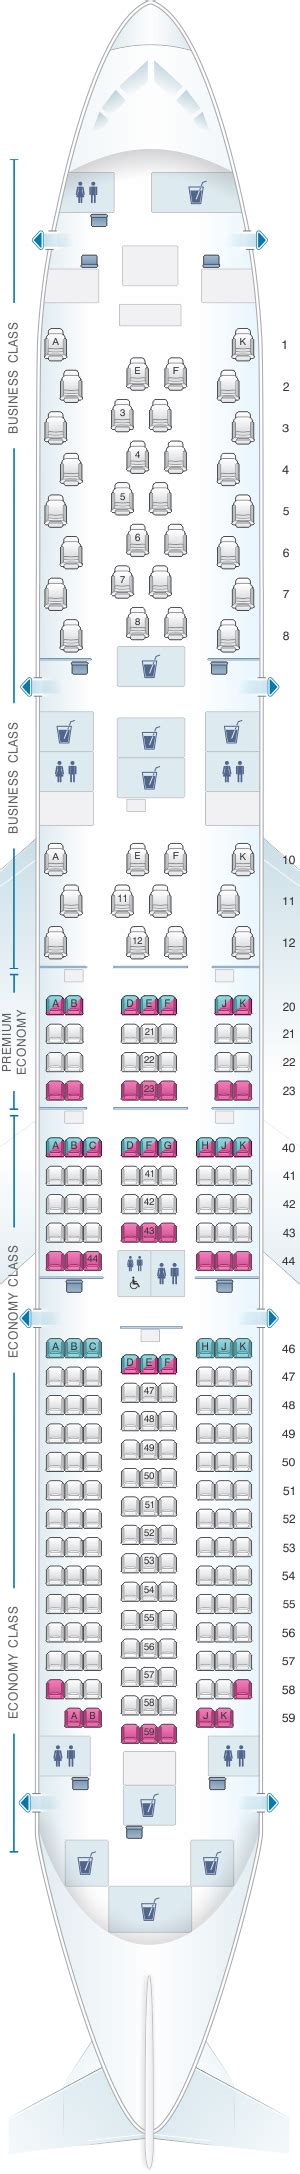 Boeing 787 9 Seat Map Elcho Table